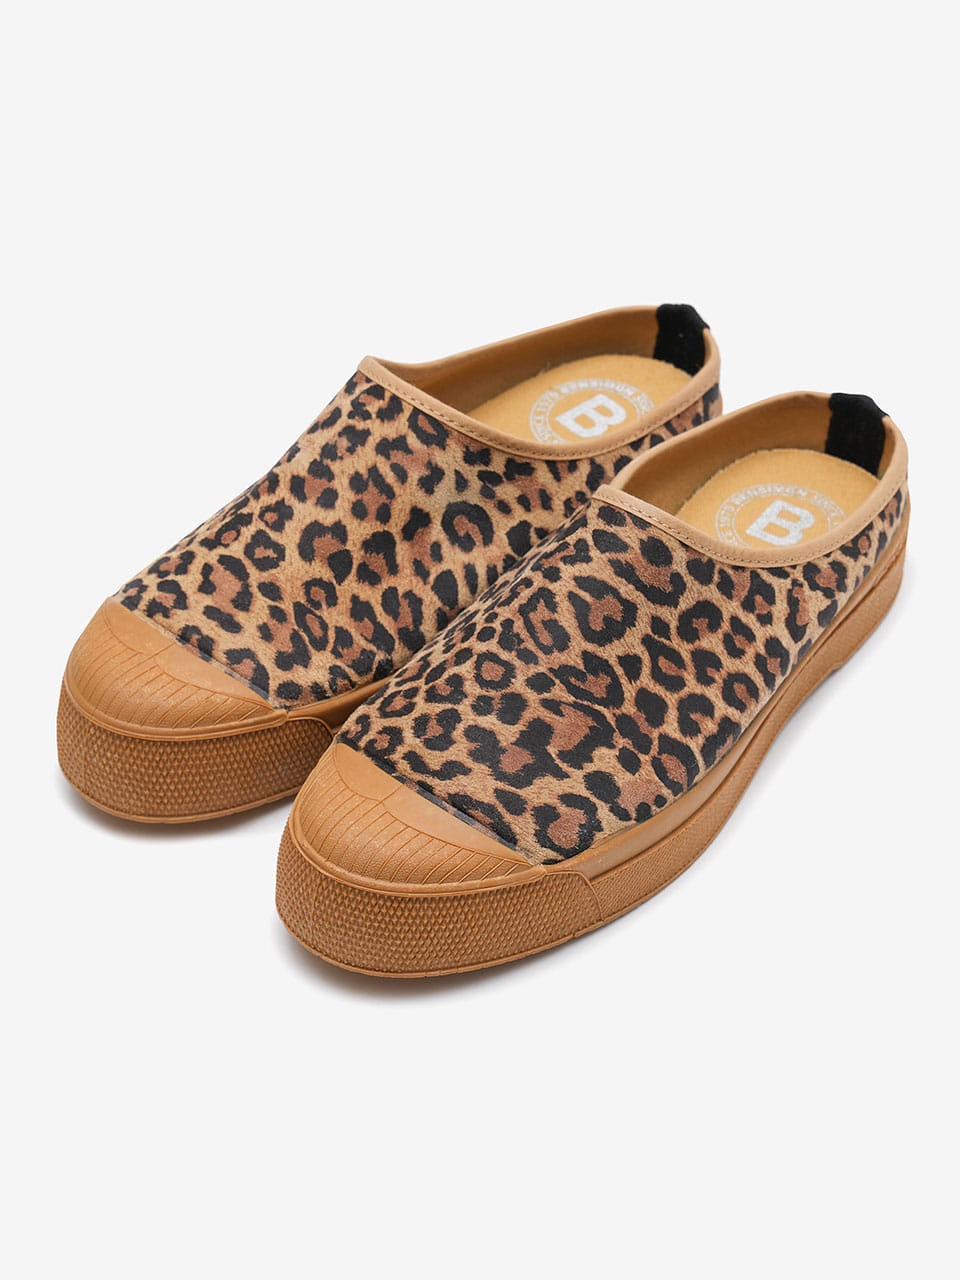 LIMITED MULE LEATHER - LEOPARD